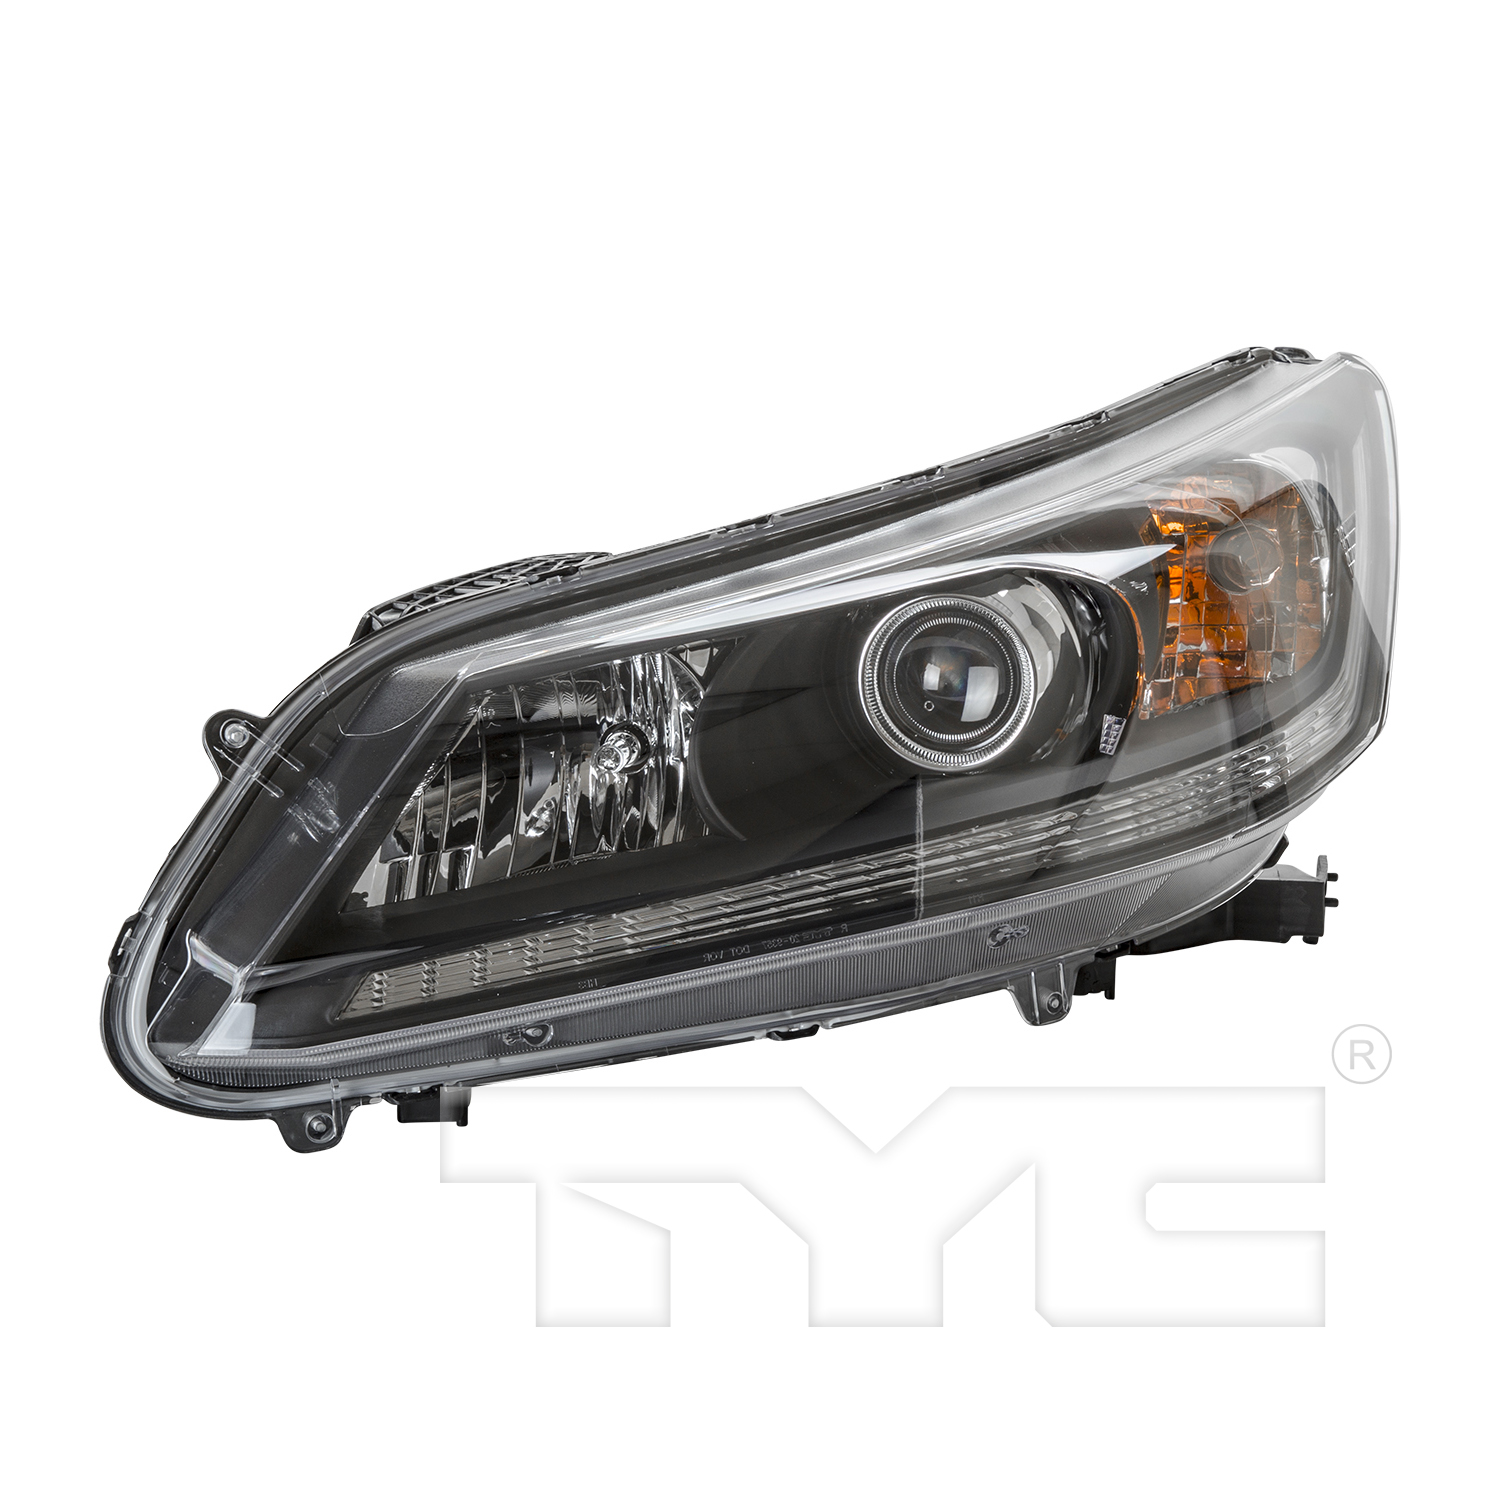 Aftermarket HEADLIGHTS for HONDA - ACCORD, ACCORD,13-15,LT Headlamp assy composite